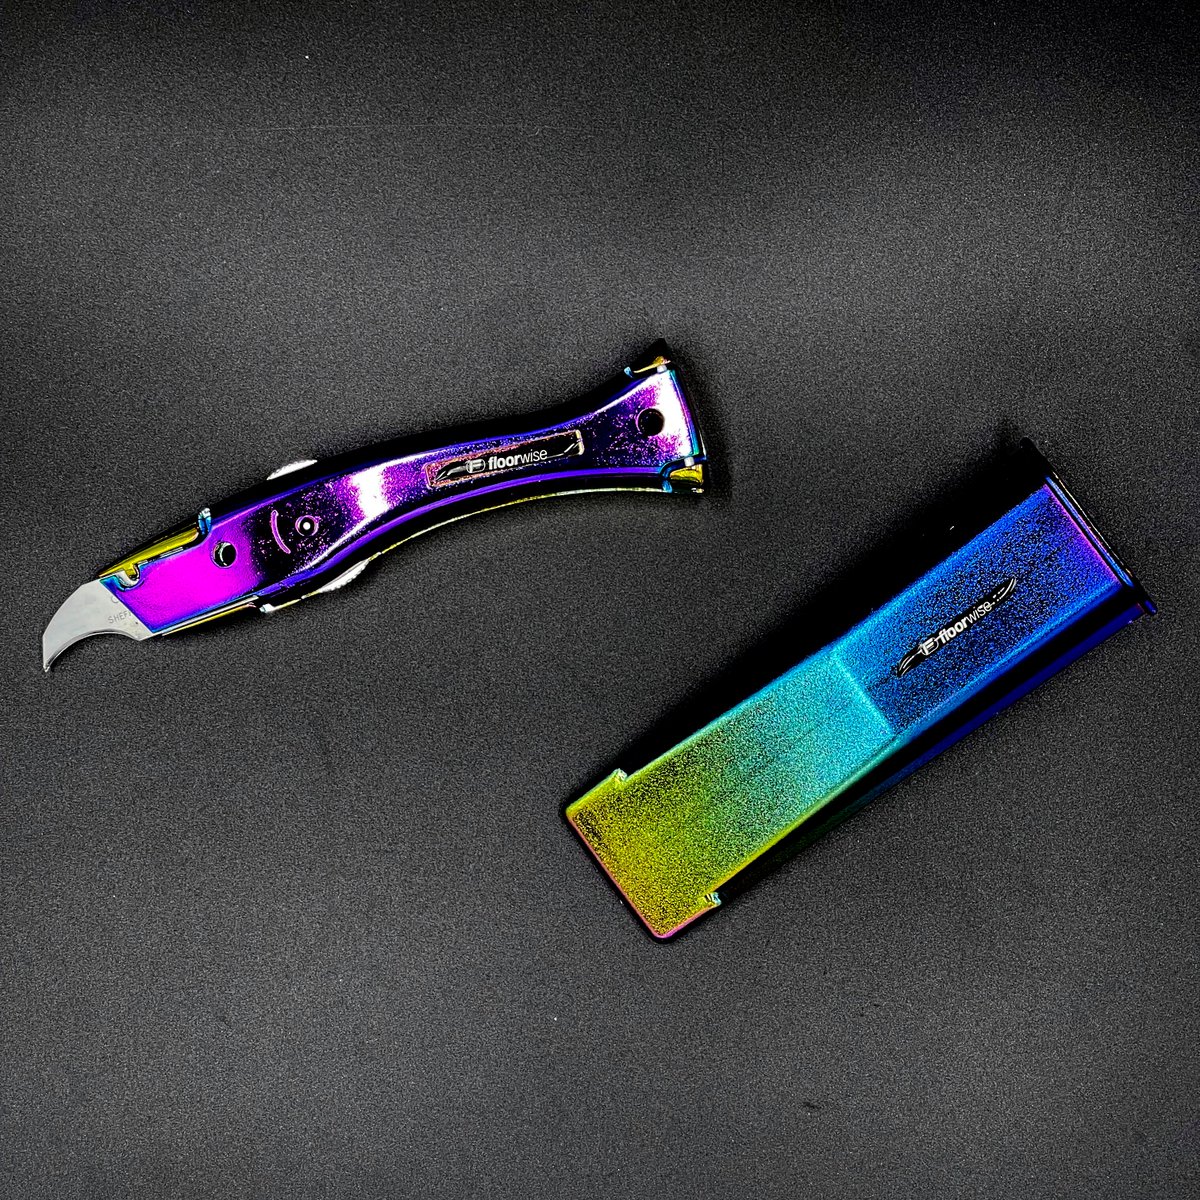 Our special edition Dolphin Knife from Floorwise. An exclusive iridescent rainbow finish, add some serious style to your tool bag. The one-off finish is matched by a coordinating hard holster to complete the look. 🌈 salesmark-west.co.uk #floorwise #dolphinknife #flooringtools